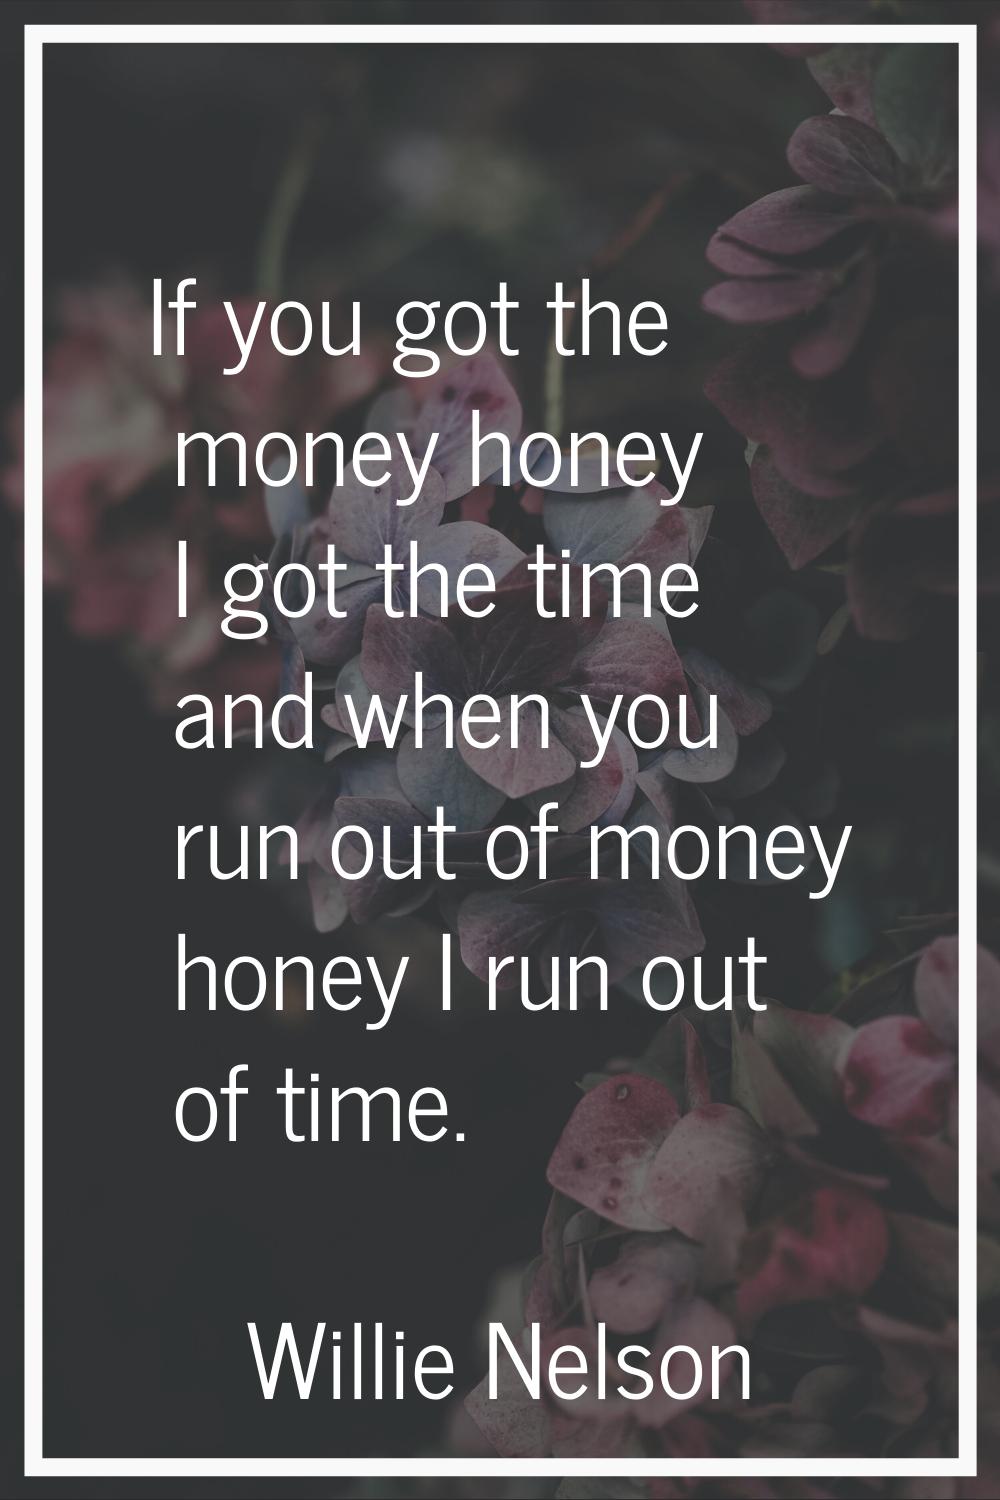 If you got the money honey I got the time and when you run out of money honey I run out of time.